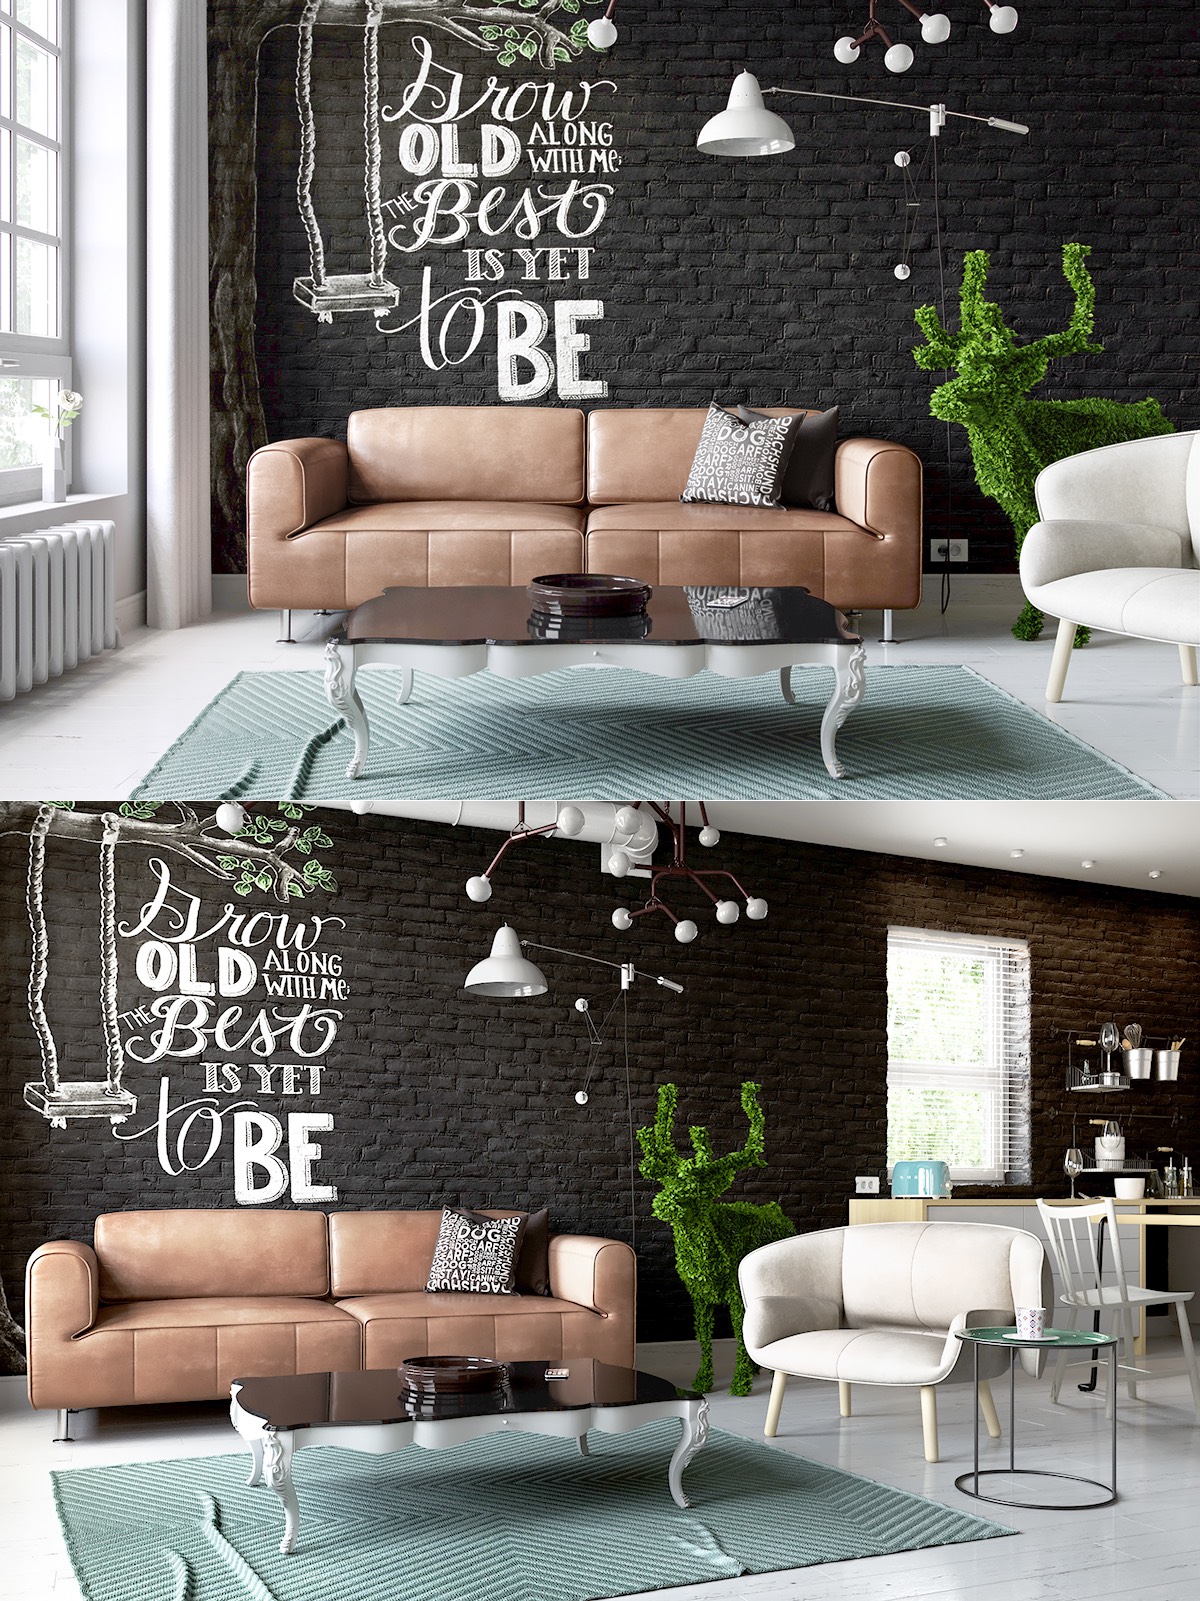 Wall decoration black living room "width =" 1200 "height =" 1601 "srcset =" https://mileray.com/wp-content/uploads/2020/05/1588517531_339_Black-Color-Show-An-Exotic-Living-Room-Decorating-Ideas.jpg 1200w, https: // myfashionos. com / wp-content / uploads / 2016/08 / Para-Design-225x300.jpg 225w, https://mileray.com/wp-content/uploads/2016/08/Para-Design-768x1024.jpg 768w, https: //mileray.com/wp-content/uploads/2016/08/Para-Design-696x929.jpg 696w, https://mileray.com/wp-content/uploads/2016/08/Para-Design-1068x1425.jpg 1068w, https://mileray.com/wp-content/uploads/2016/08/Para-Design-315x420.jpg 315w "Sizes =" (maximum width: 1200px) 100vw, 1200px